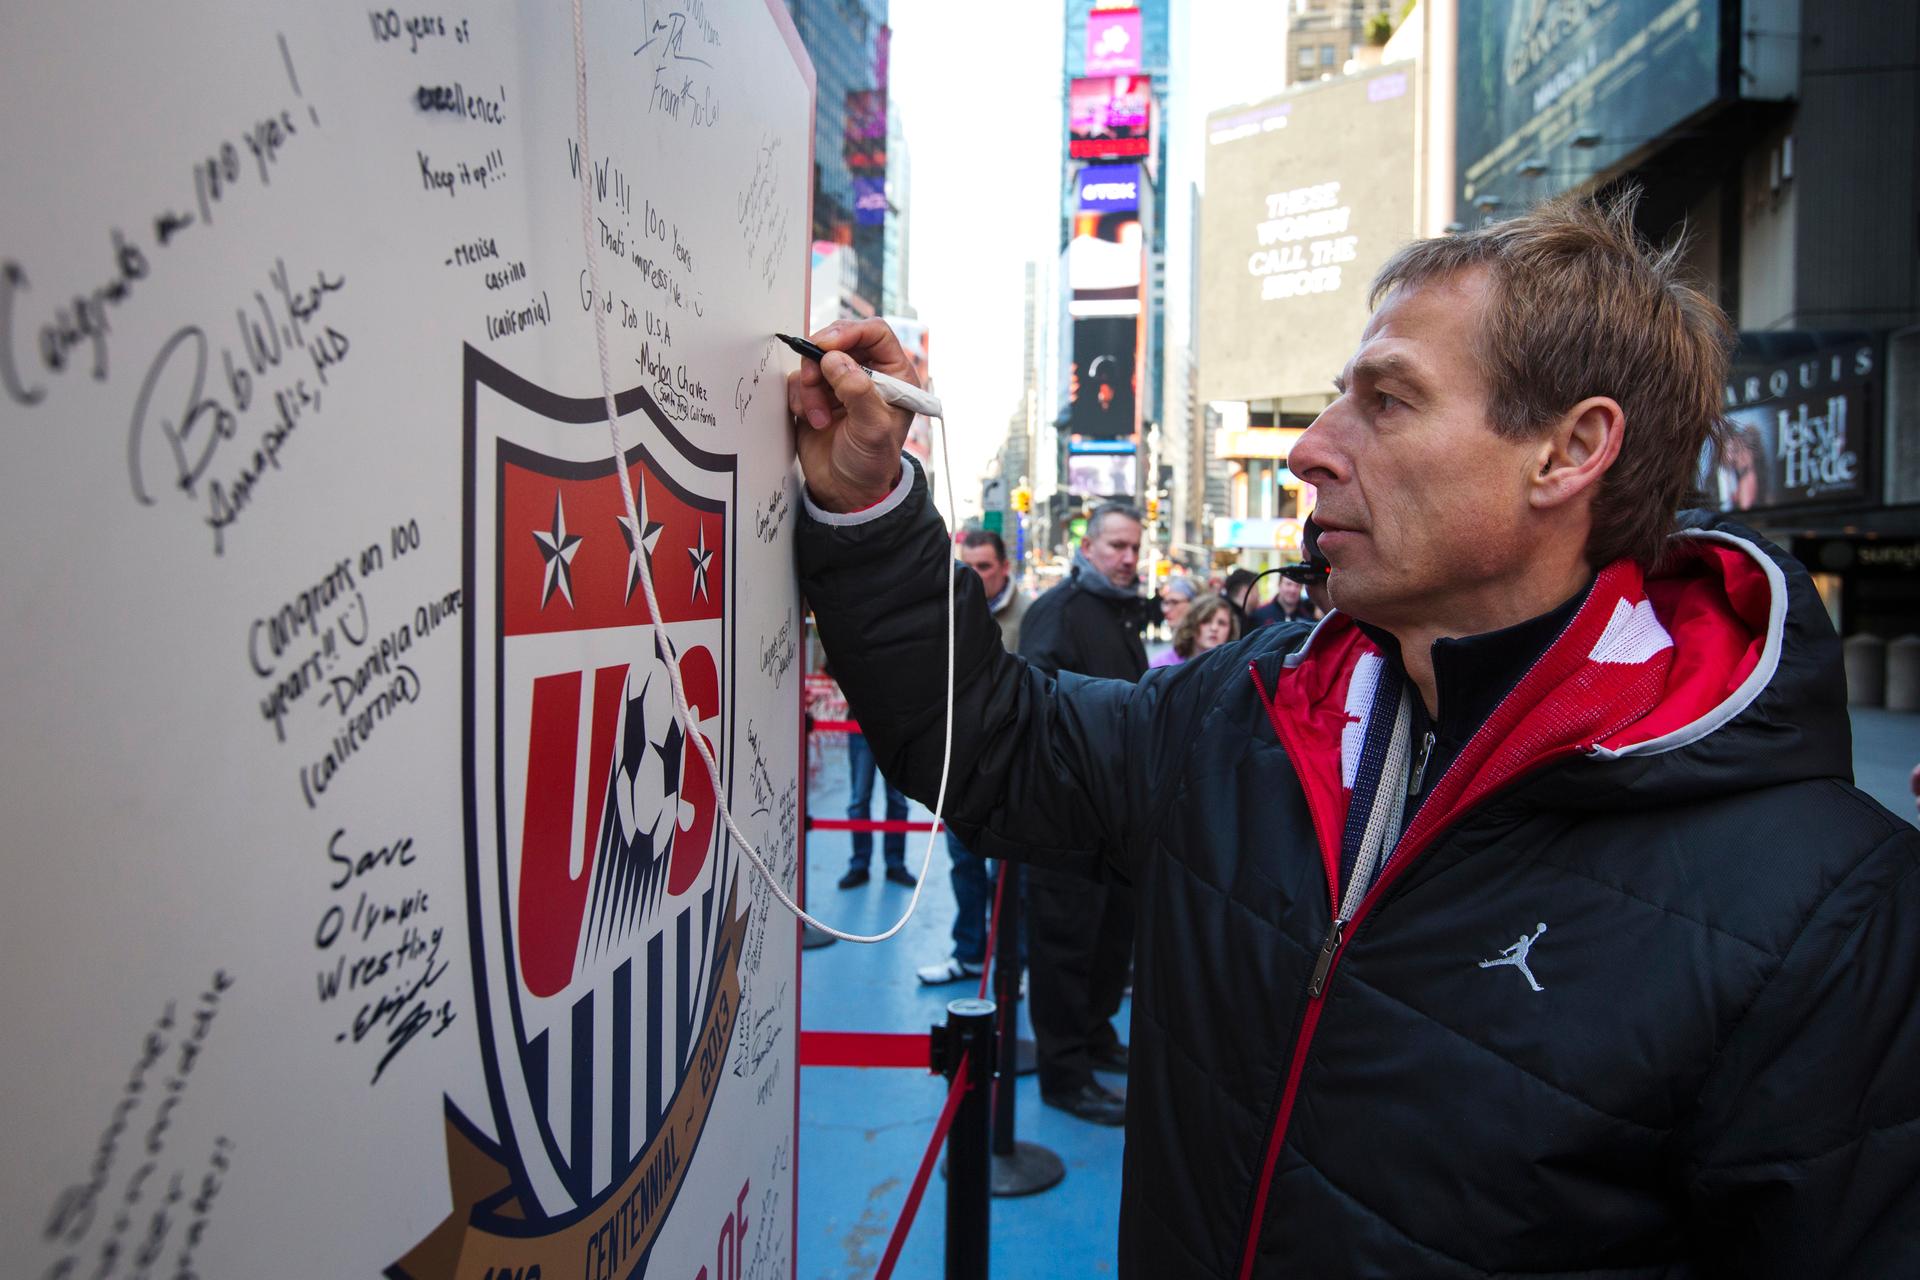 German soccer star Jurgen Klinsmann, the coach of the US men's national team, signs a board celebrating the 100th anniversary of the US national team in Times Square, April 4, 2013.